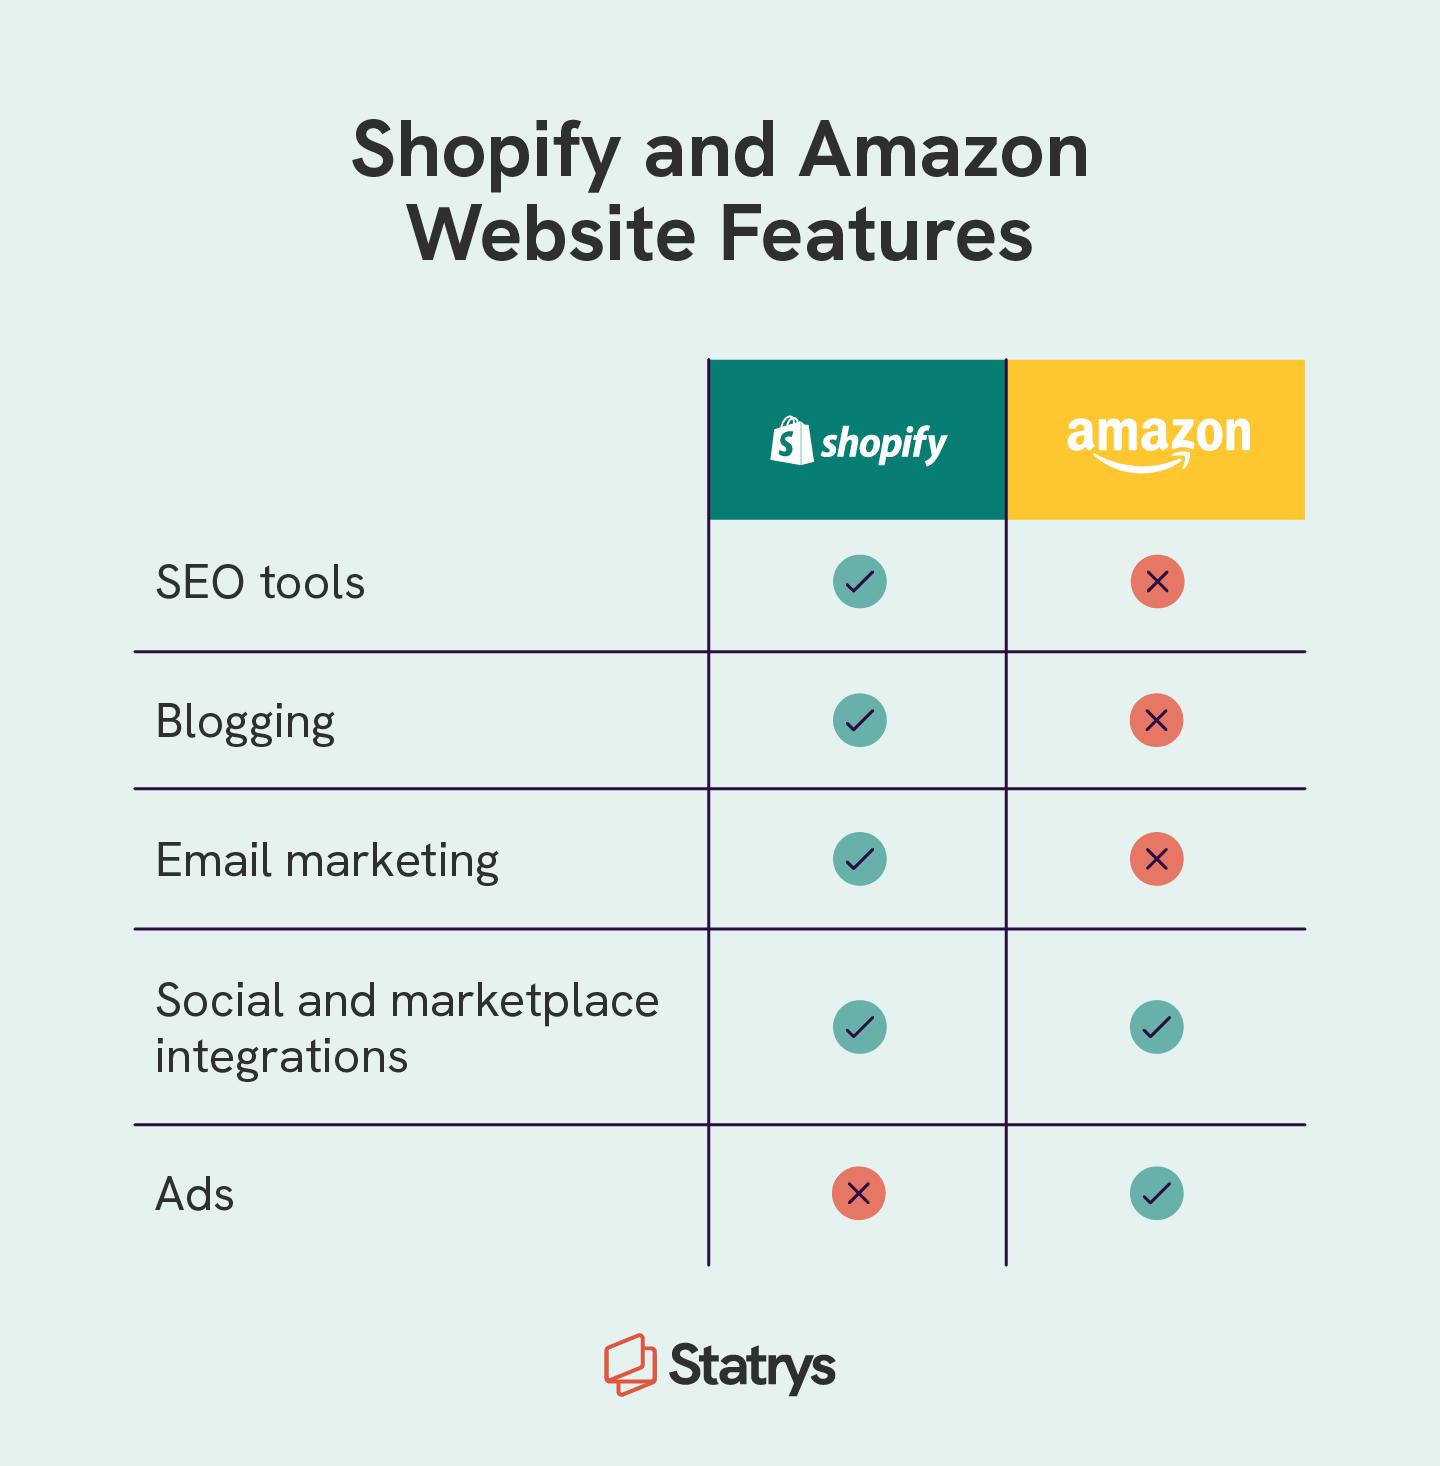 A chart covering Shopify vs. Amazon website features including SEO tools, blogging capabilities, email marketing, social and marketplace integrations, and ads.